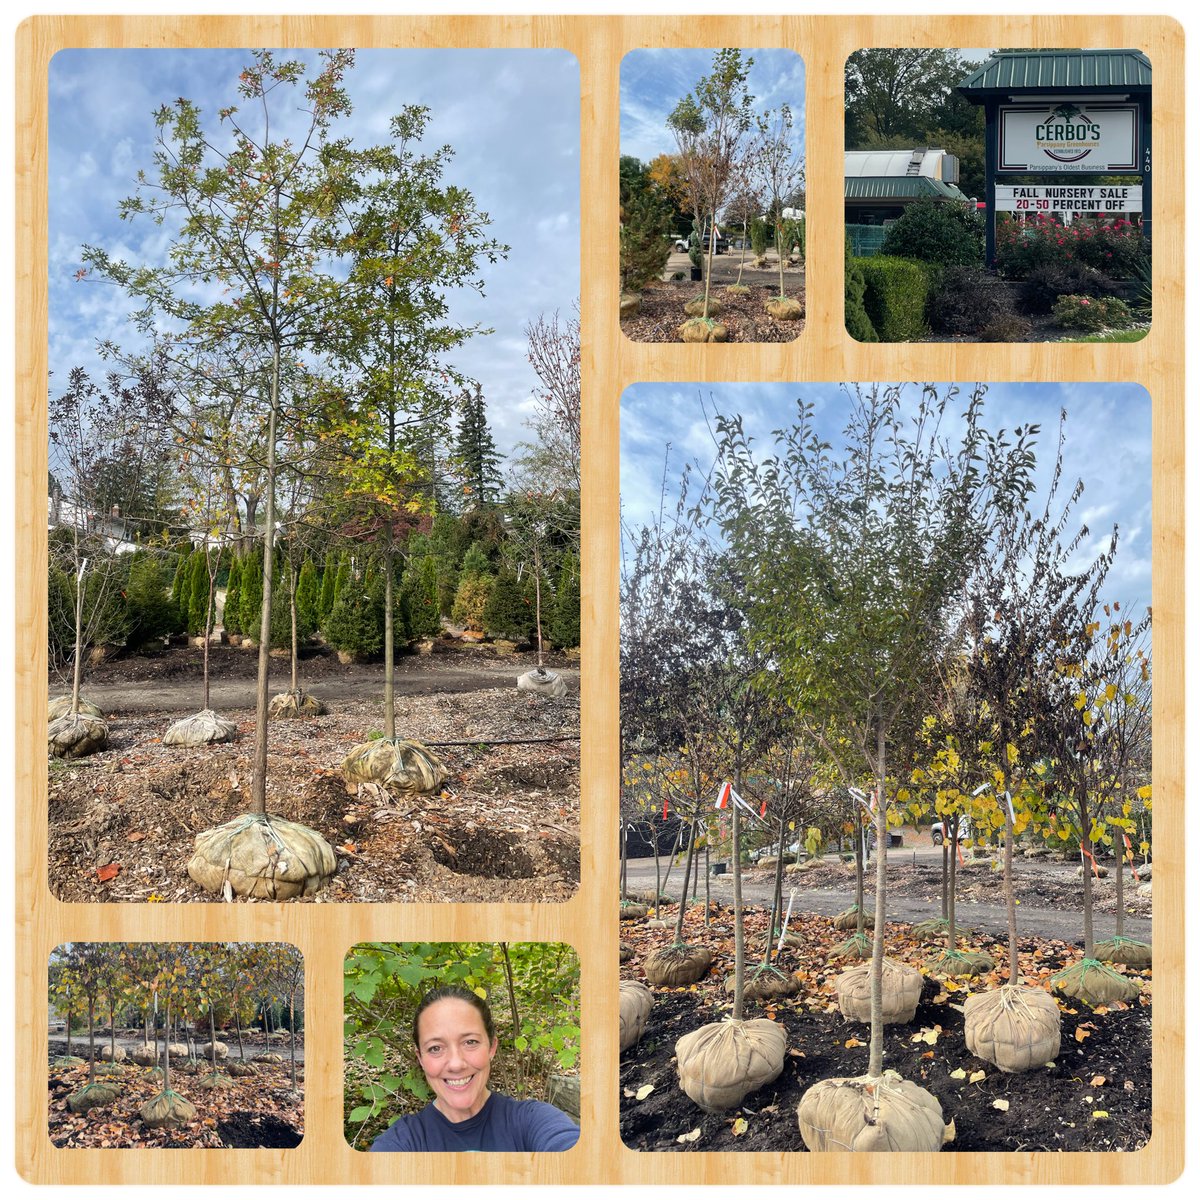 🍁🌳Met our BIG new trees @Cerbos today! They're amazing! Beyond excited for planting @ValleyviewMS next wk🌳🌏#ClimateAction @ClimateActionED #SchoolyardHabitat @SJ_Schools @EcoSchoolsUSA thx @NJNaturalGas & @denvillenj